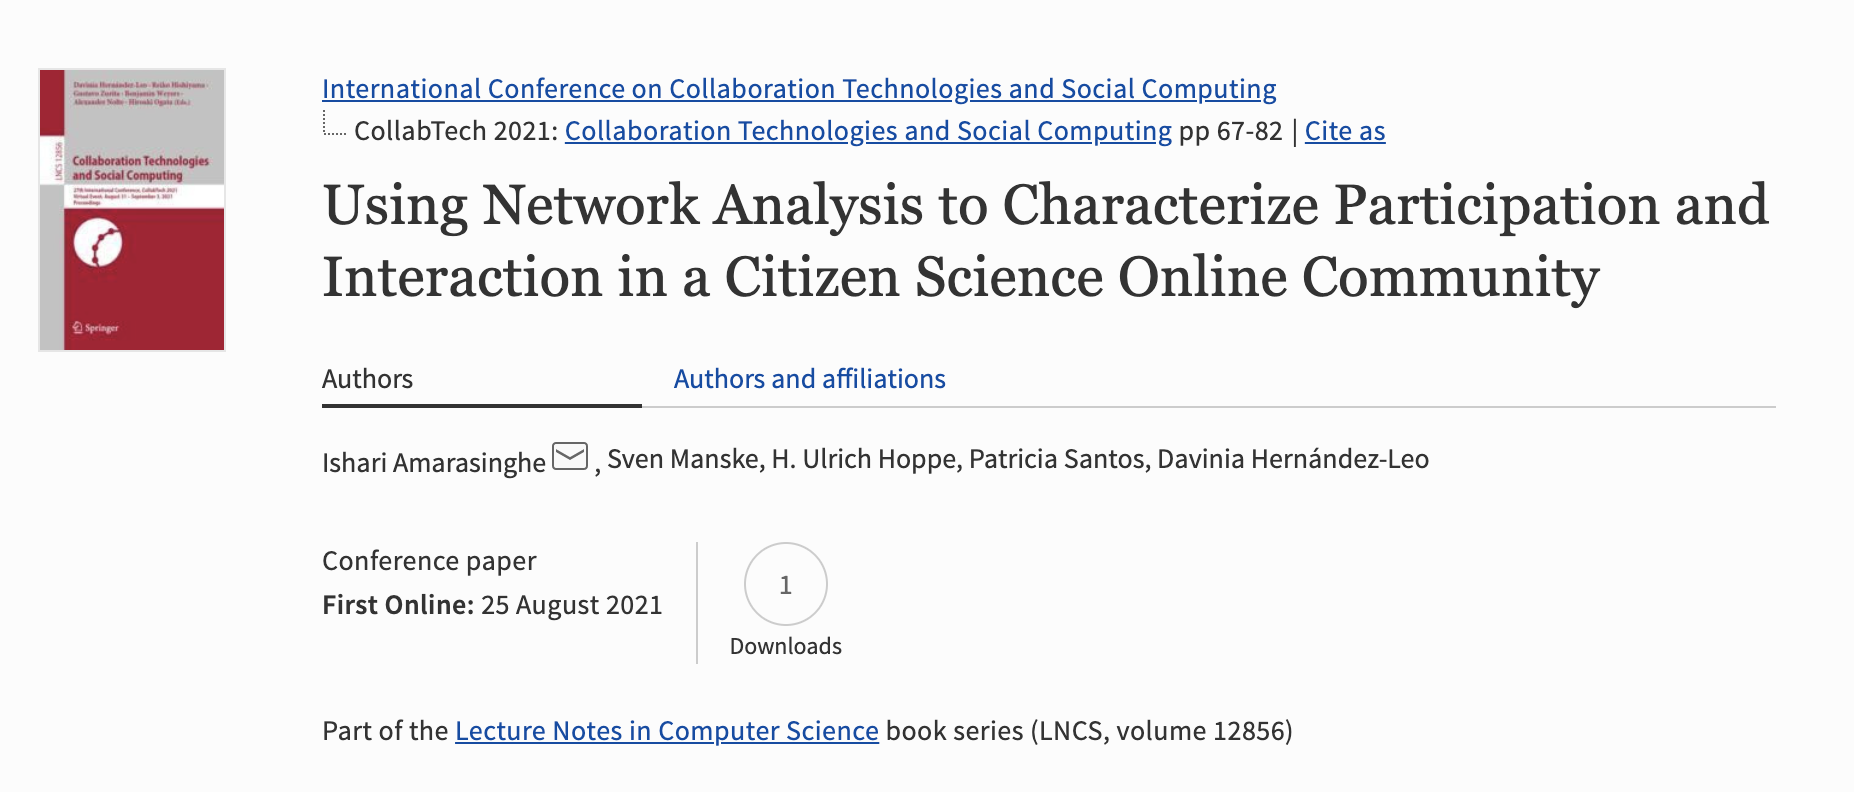 CollabTech2021 paper: Using Network Analysis to Characterize Participation and Interaction in a Citizen Science Online Community